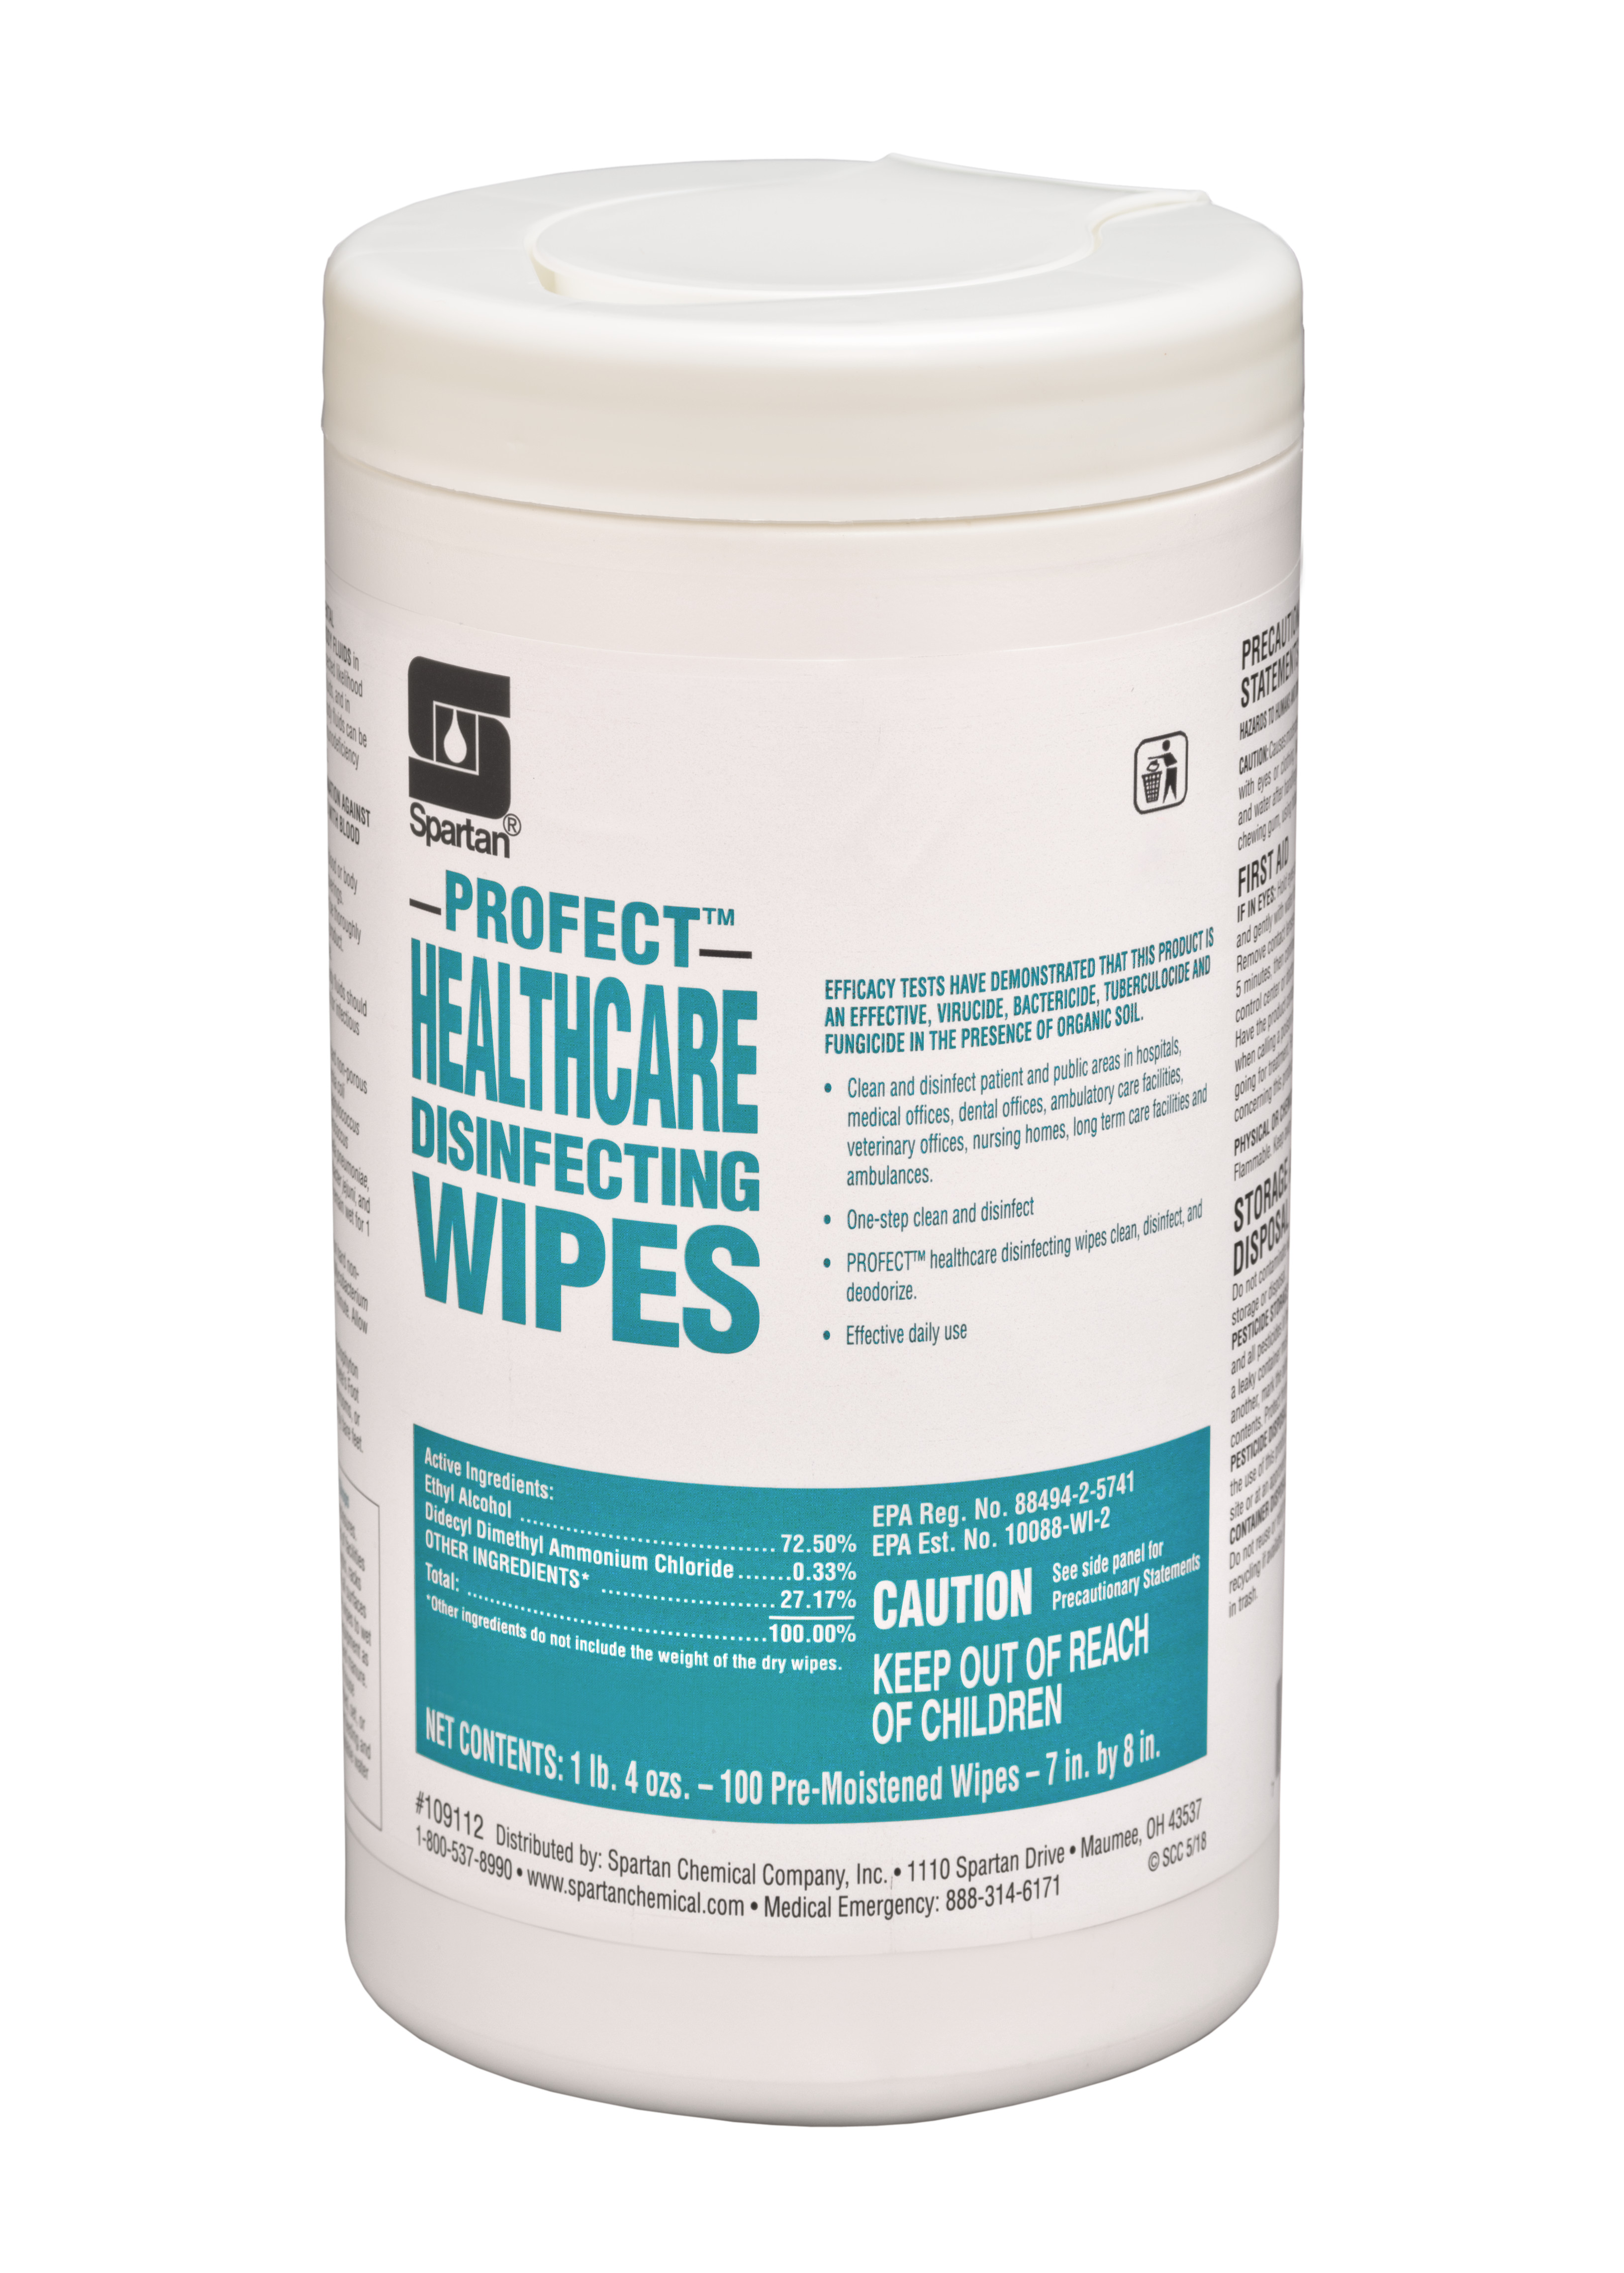 Profect+Healthcare+Disinfecting+Wipes+%7B100+Wipes+12%2FCase%7D